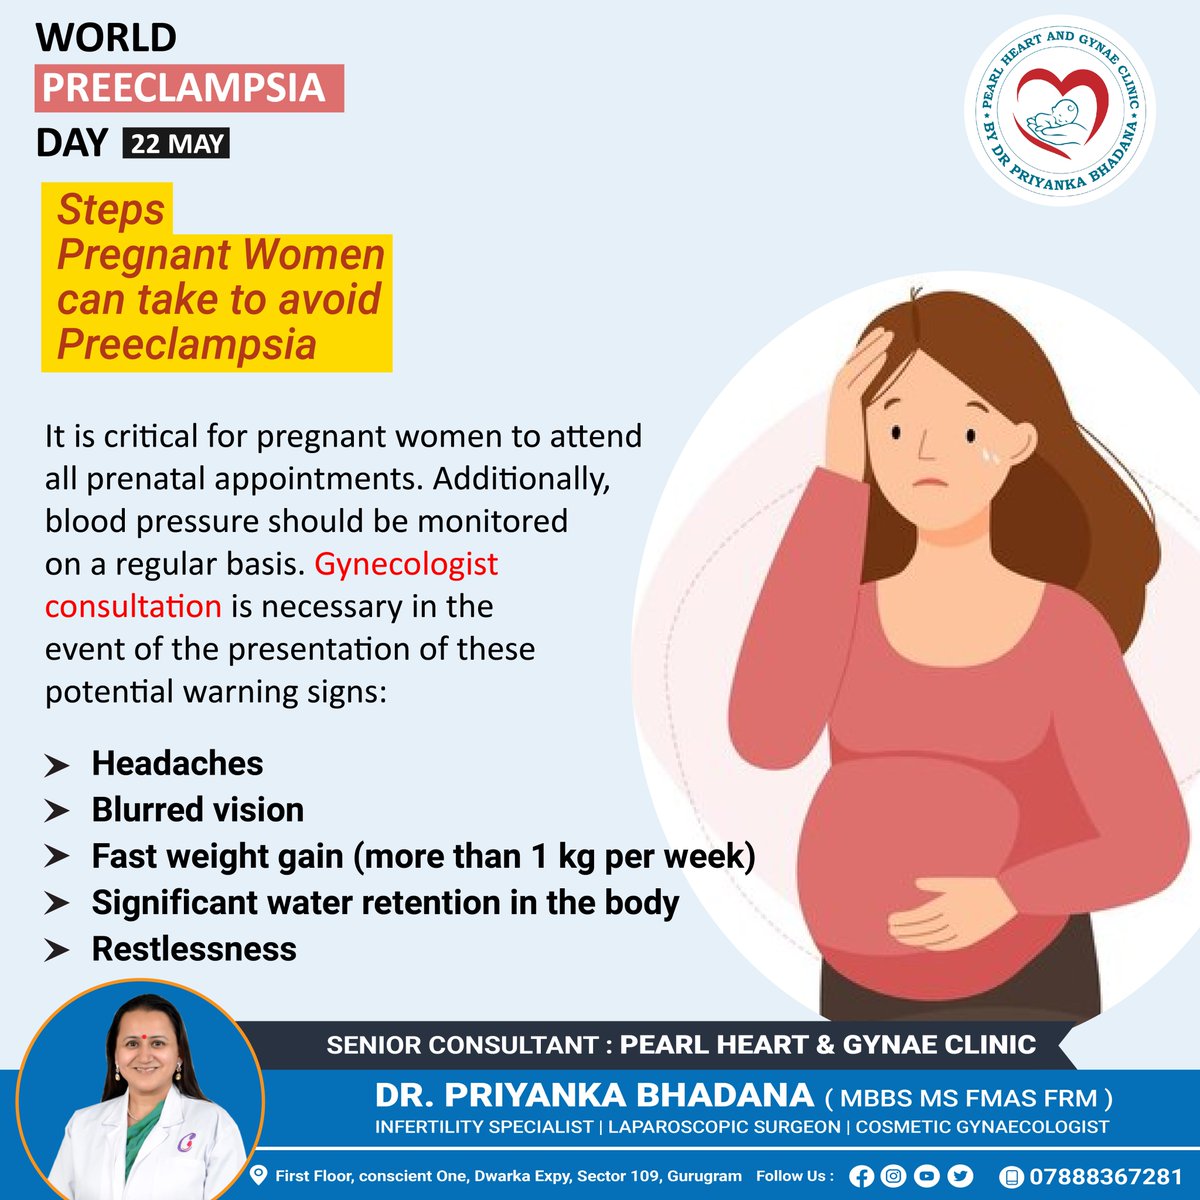 'World Preeclampsia Day: Empowering Healthy Pregnancies for Every Mother.'

Contact us now to schedule a consultation Call Now - 07888367281
#MaternalHealth #WorldPreeclampsiaDay #PregnancyComplications #EarlyDetectionMatters #HealthyPregnancies #PreeclampsiaAwareness